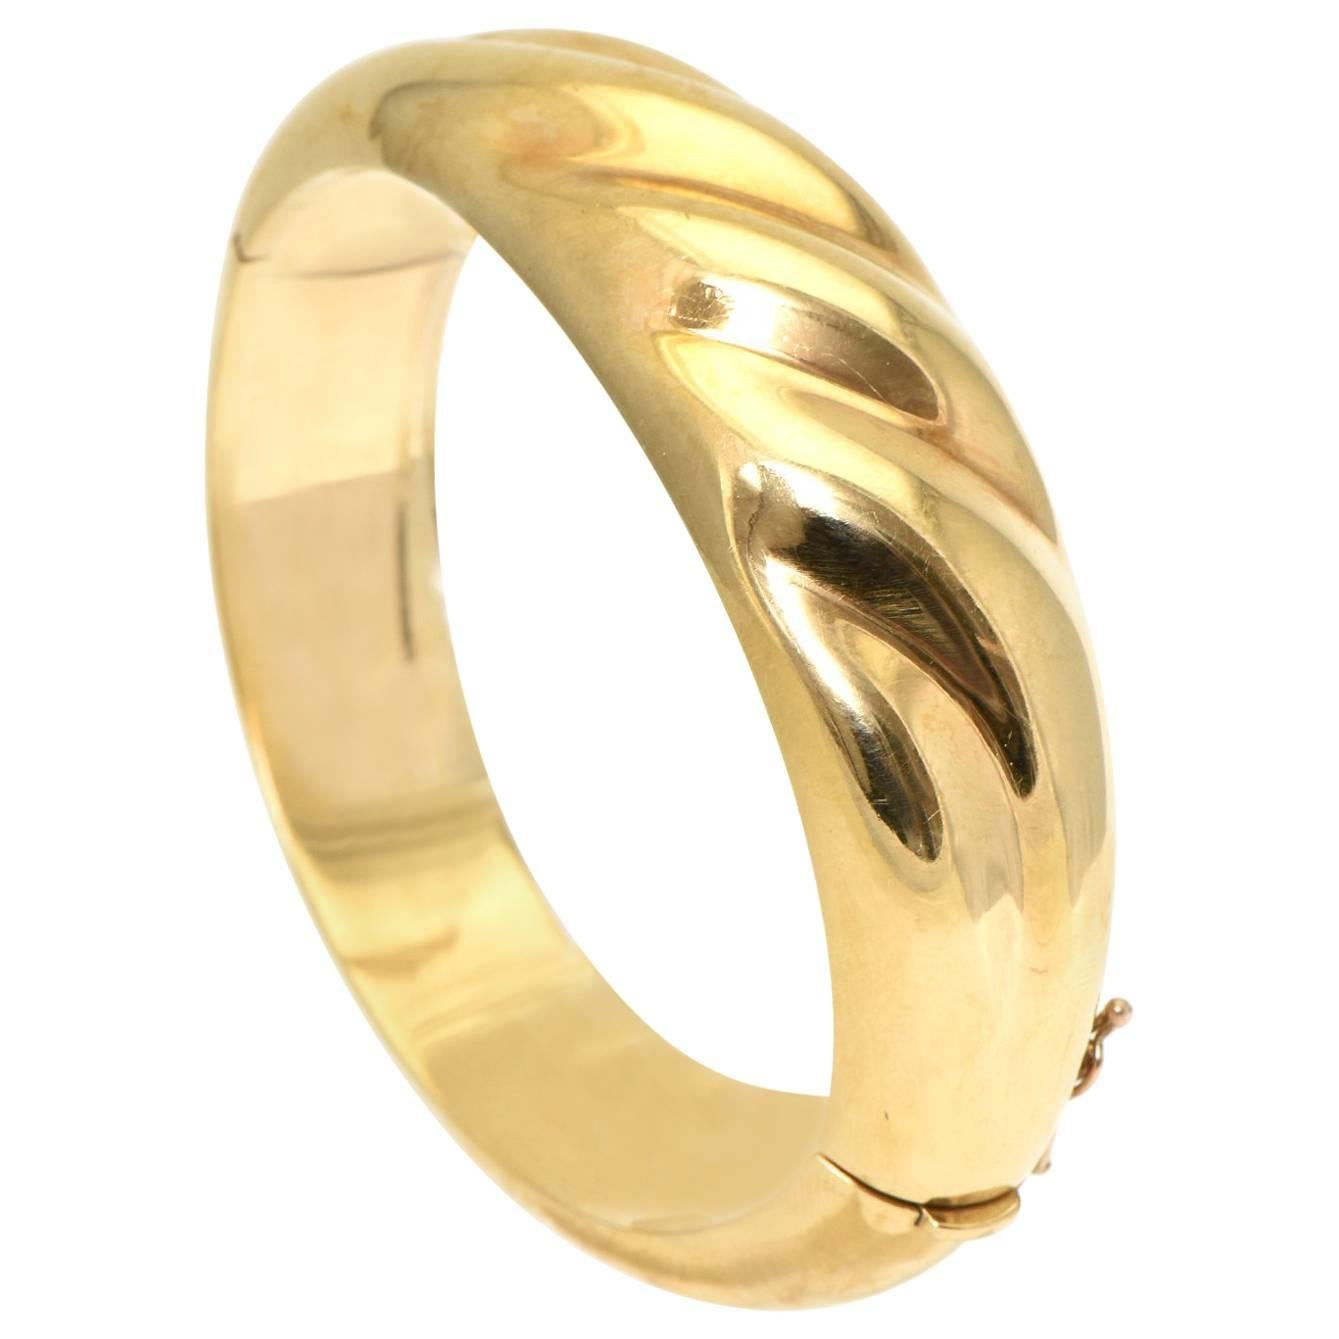 1970s Wide Yellow Gold Wave Bangle Bracelet